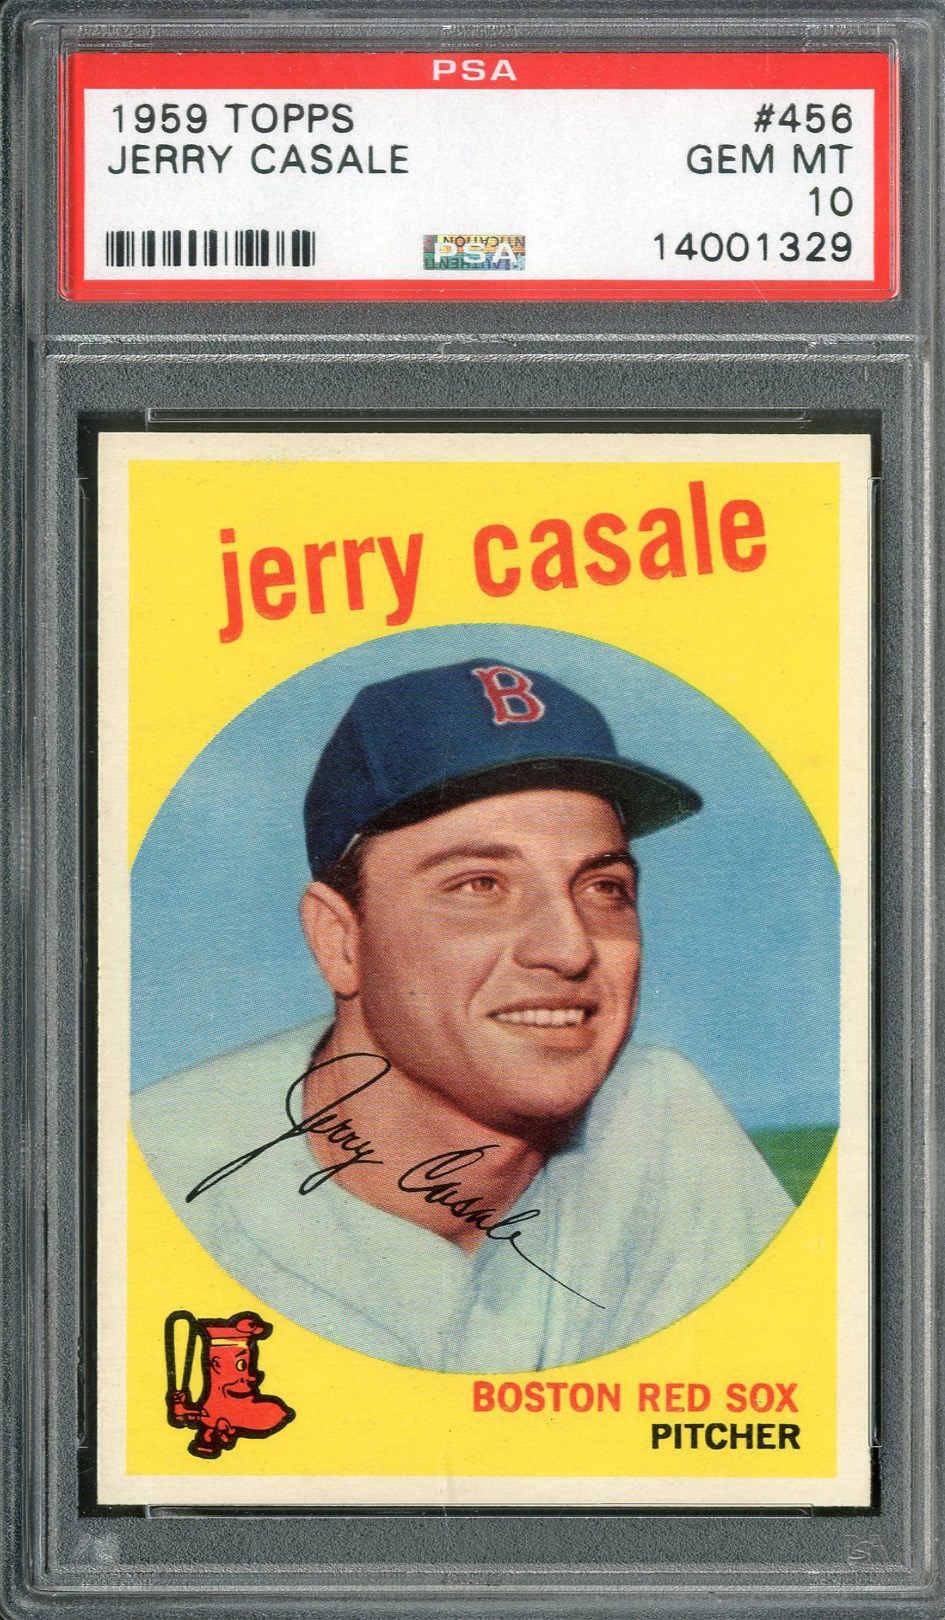 Baseball and Trading Cards - 1959 Topps #456 Jerry Casale PSA GEM MINT 10